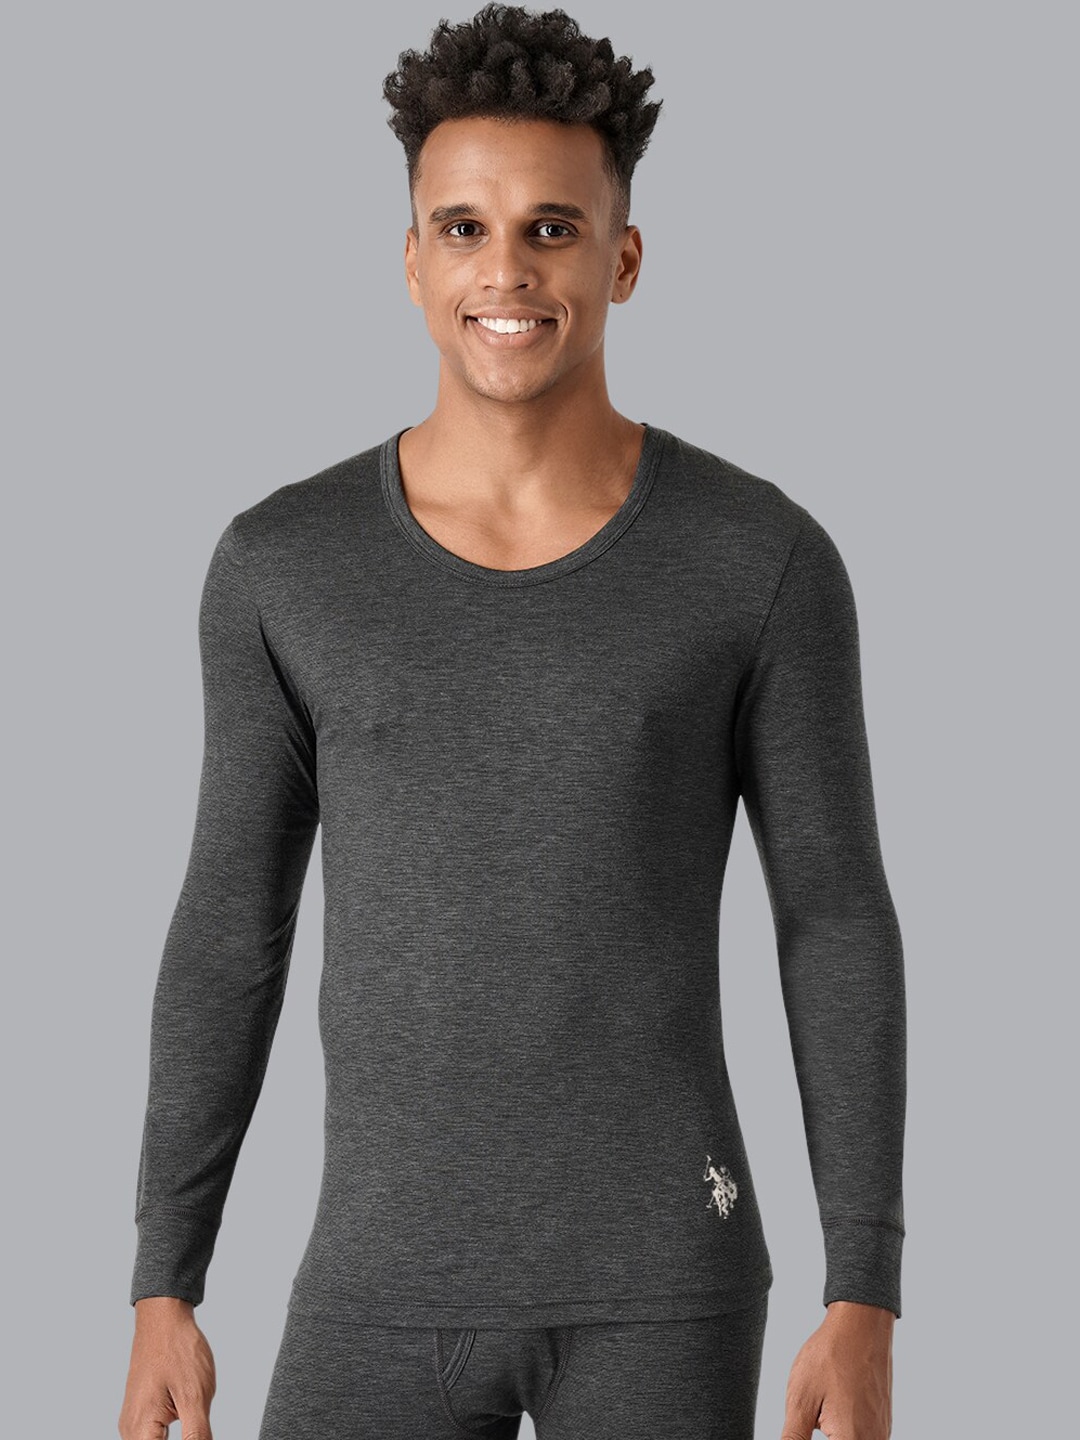 U.S. Polo Assn. Men Grey Solid Thermal Top Price in India